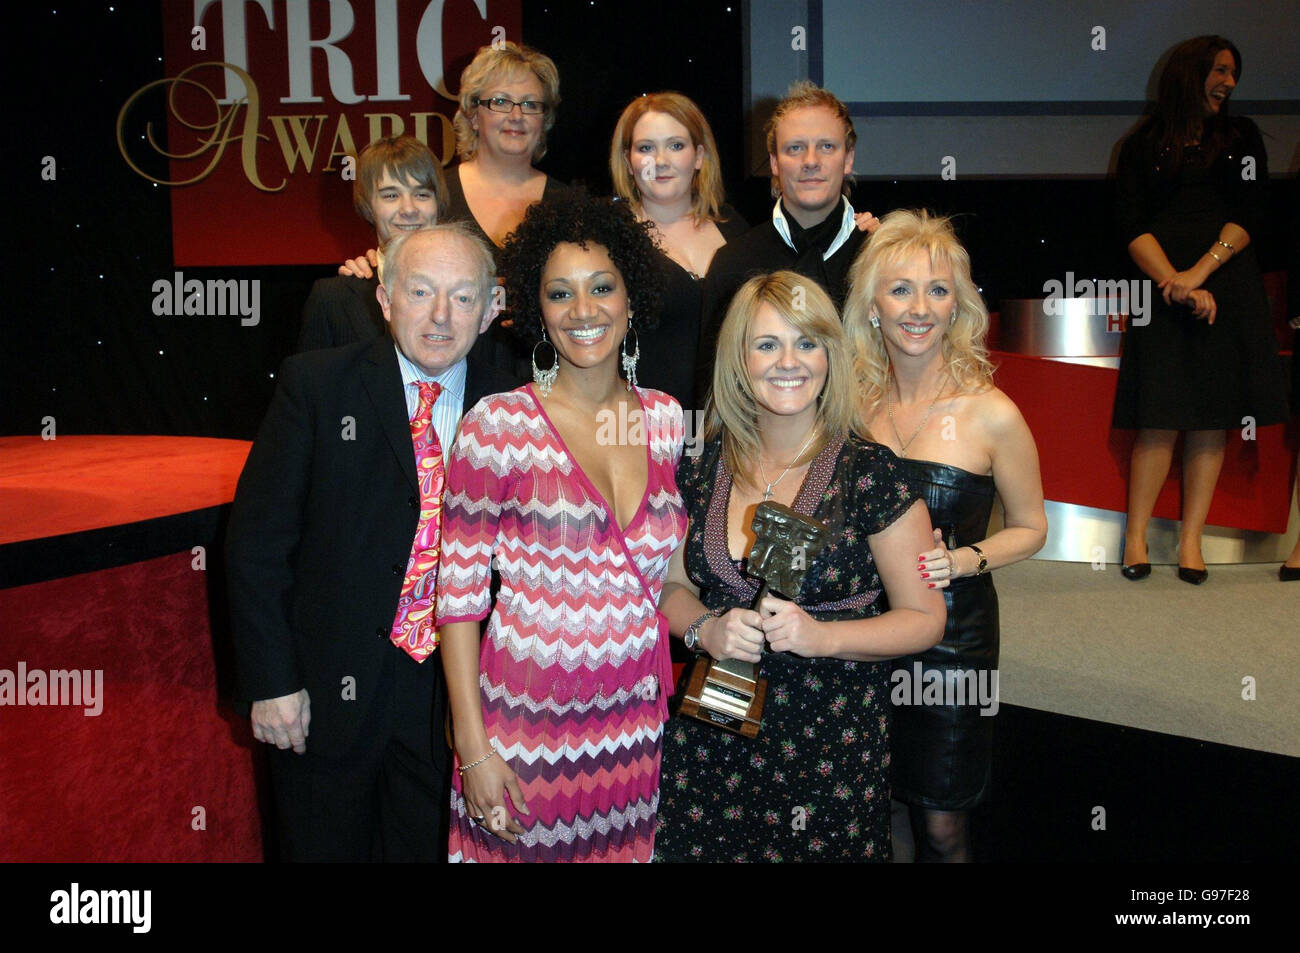 Members of the cast of Coronation Street (Back, Left to Right) Jack Shepherd, Sue Cleaver, Jennie McAlpine, and Antony Cotton, with Tupele Dorgu (Front, second left) and Sally Lindsay (front, second right) receive the award for TV Soap of the Year from Paul Daniels (front left) and Debbie McGee (front, right), during the Television and Radio Industries Club (TRIC) Awards, at Grosvenor House, central London, Tuesday 7 March 2006. The awards honour performers and programmes and are voted for by radio and television personnel. PRESS ASSOCIATION Photo. Photo credit should read: Steve Parsons/PA Stock Photo